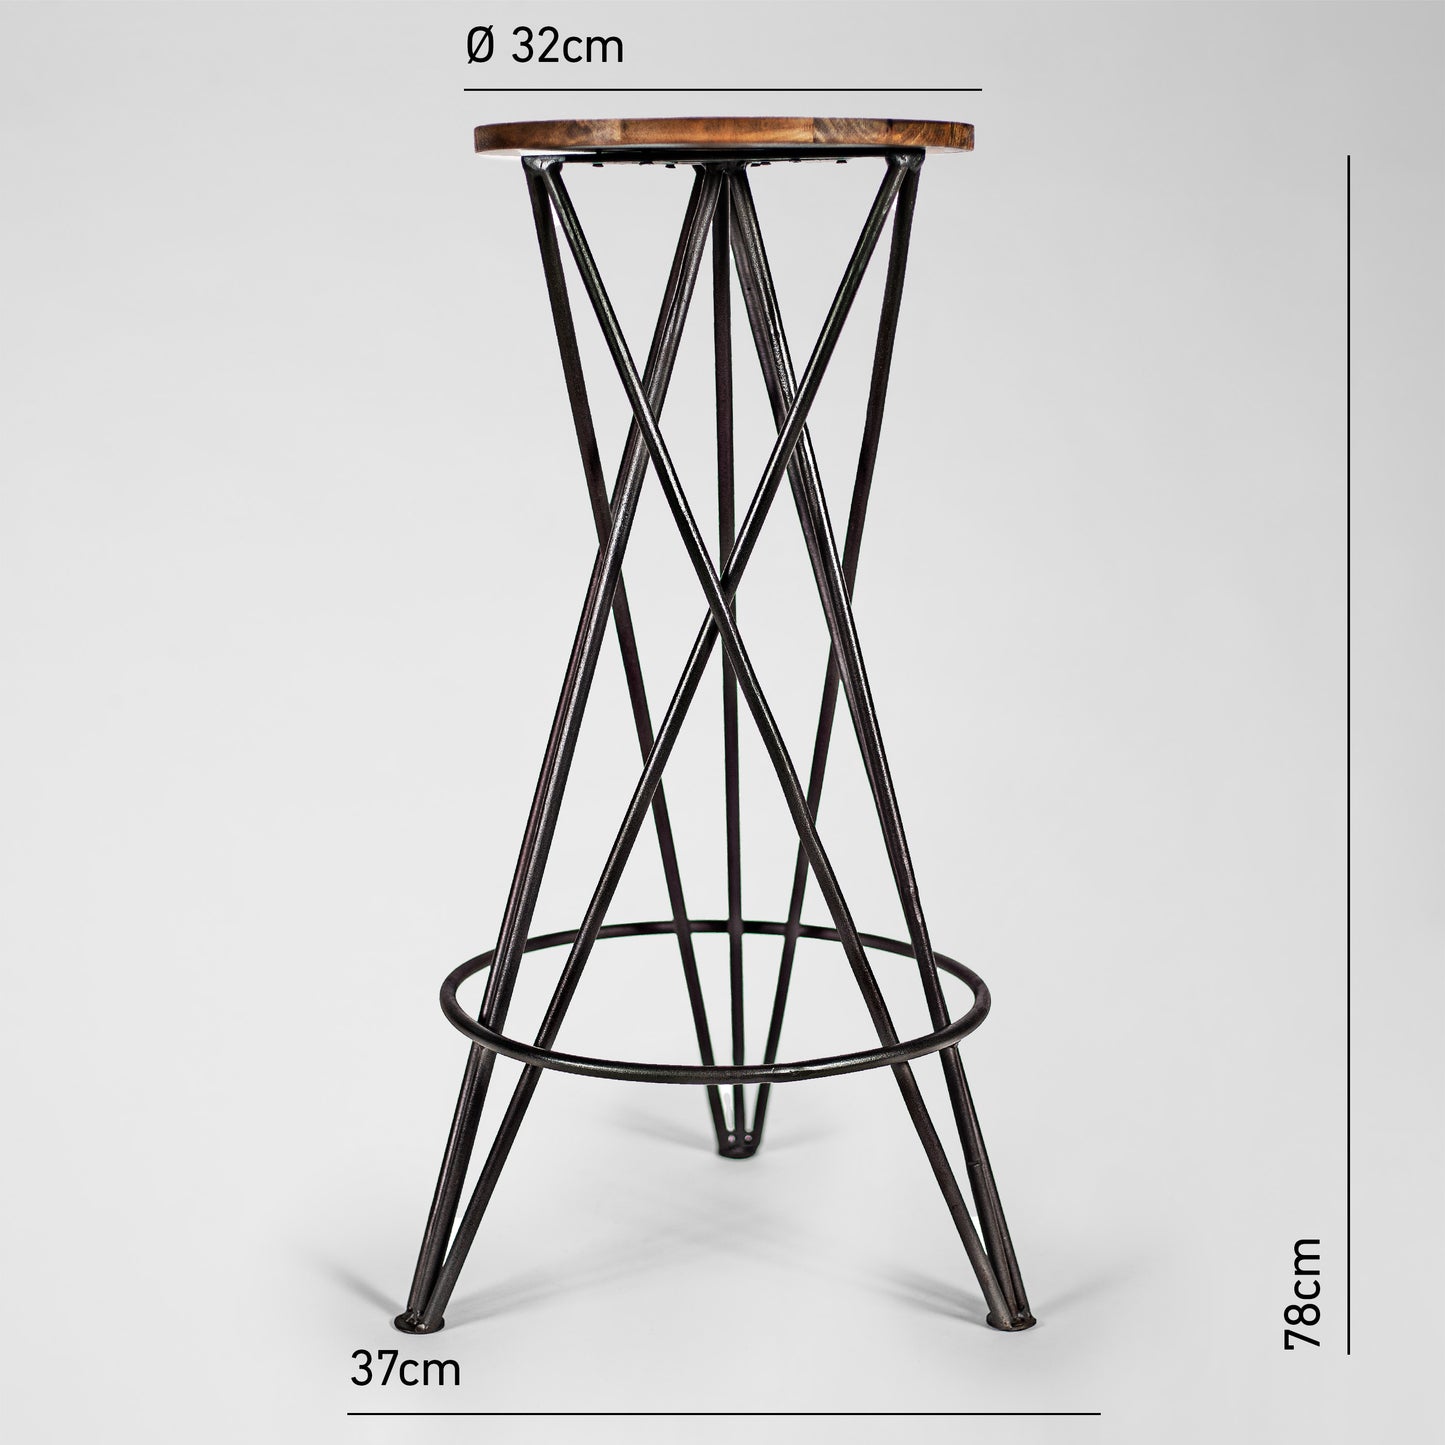 Graceful Grace – Handmade industrial design stool made of metal with wooden seat in black